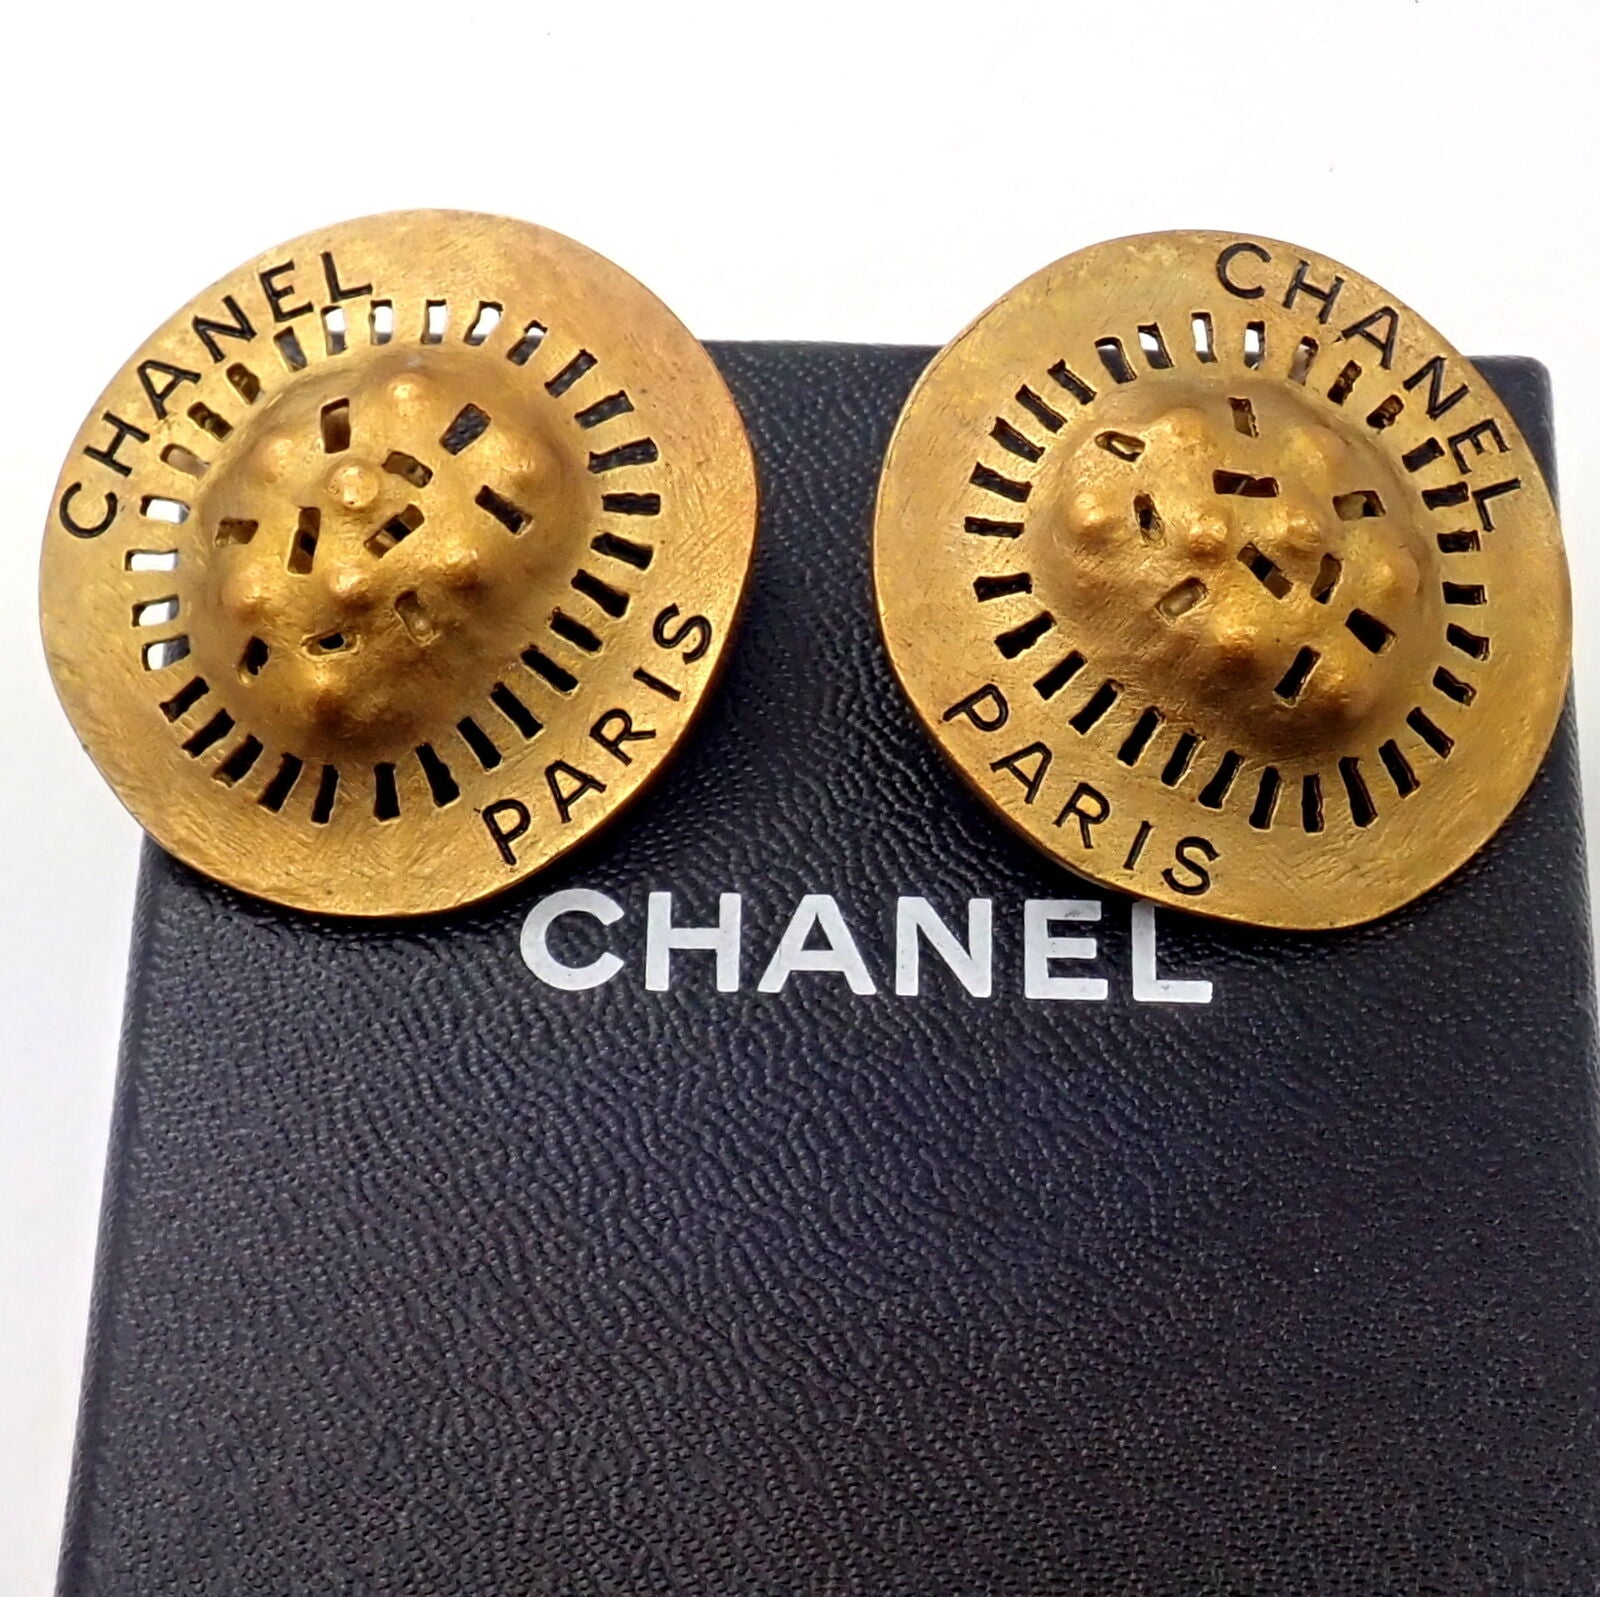 vintage chanel gold tone brooch and matching earrings set - Chanel chanel  paris fashion week front row valentino - RvceShops's Closet